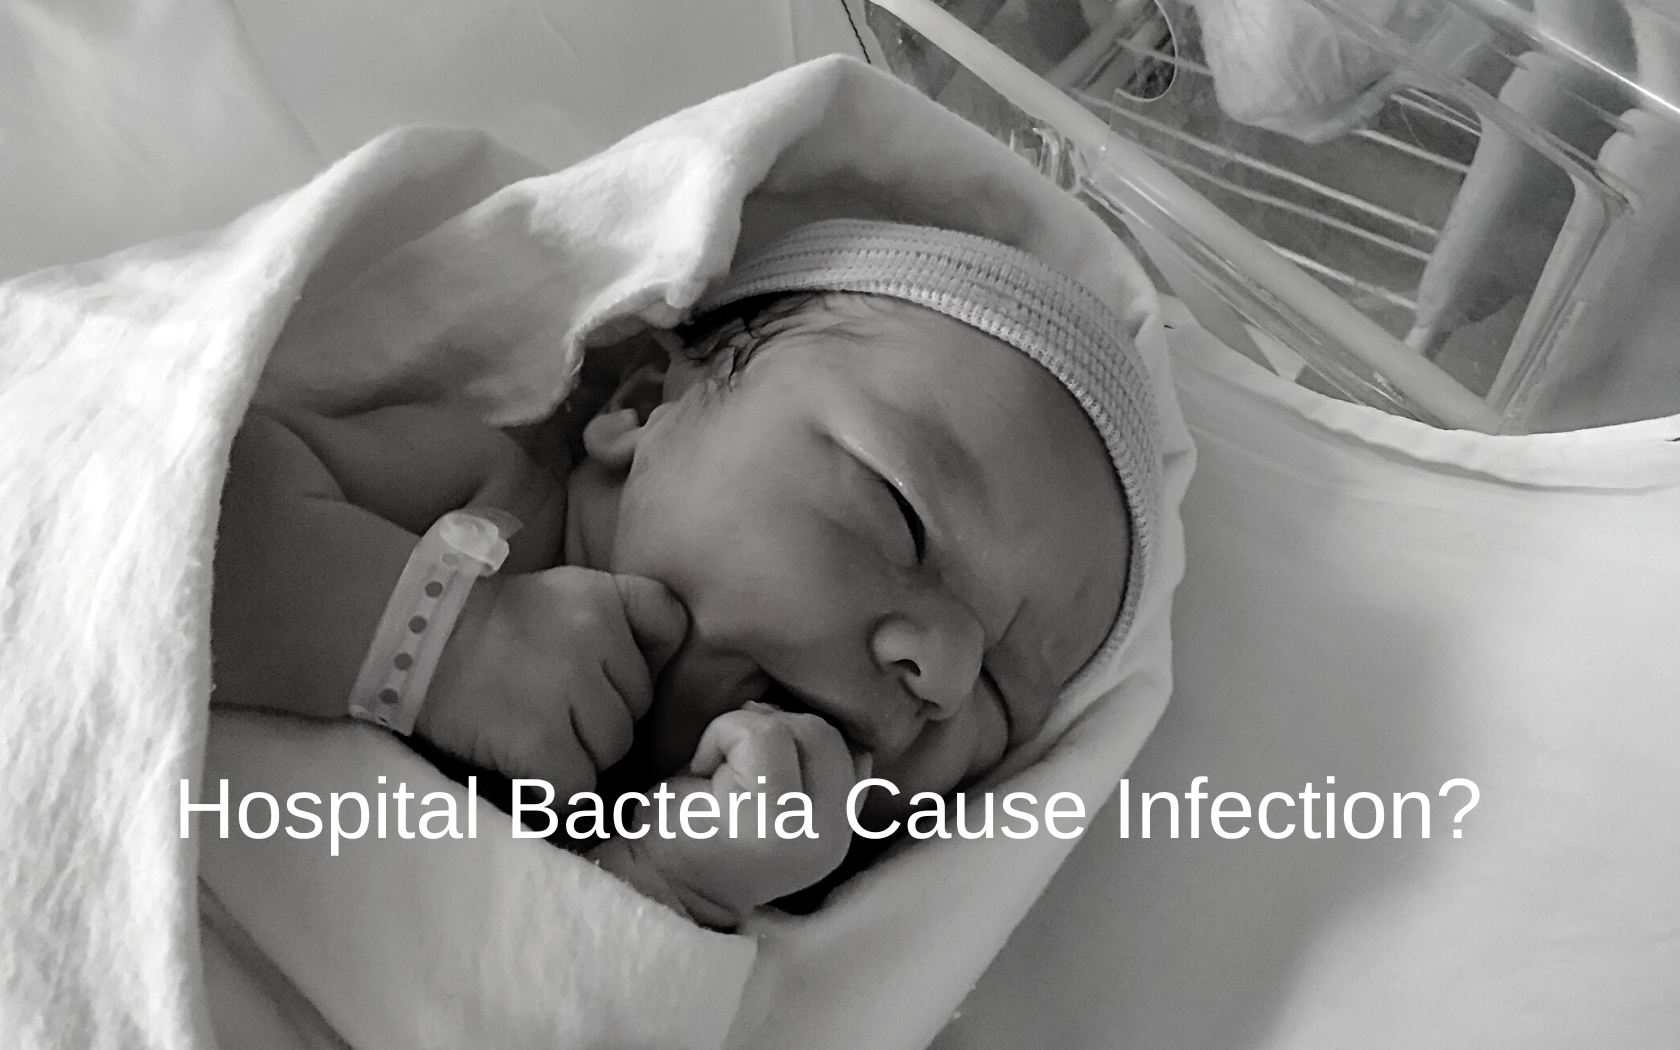 Newborn infection with staph infection.